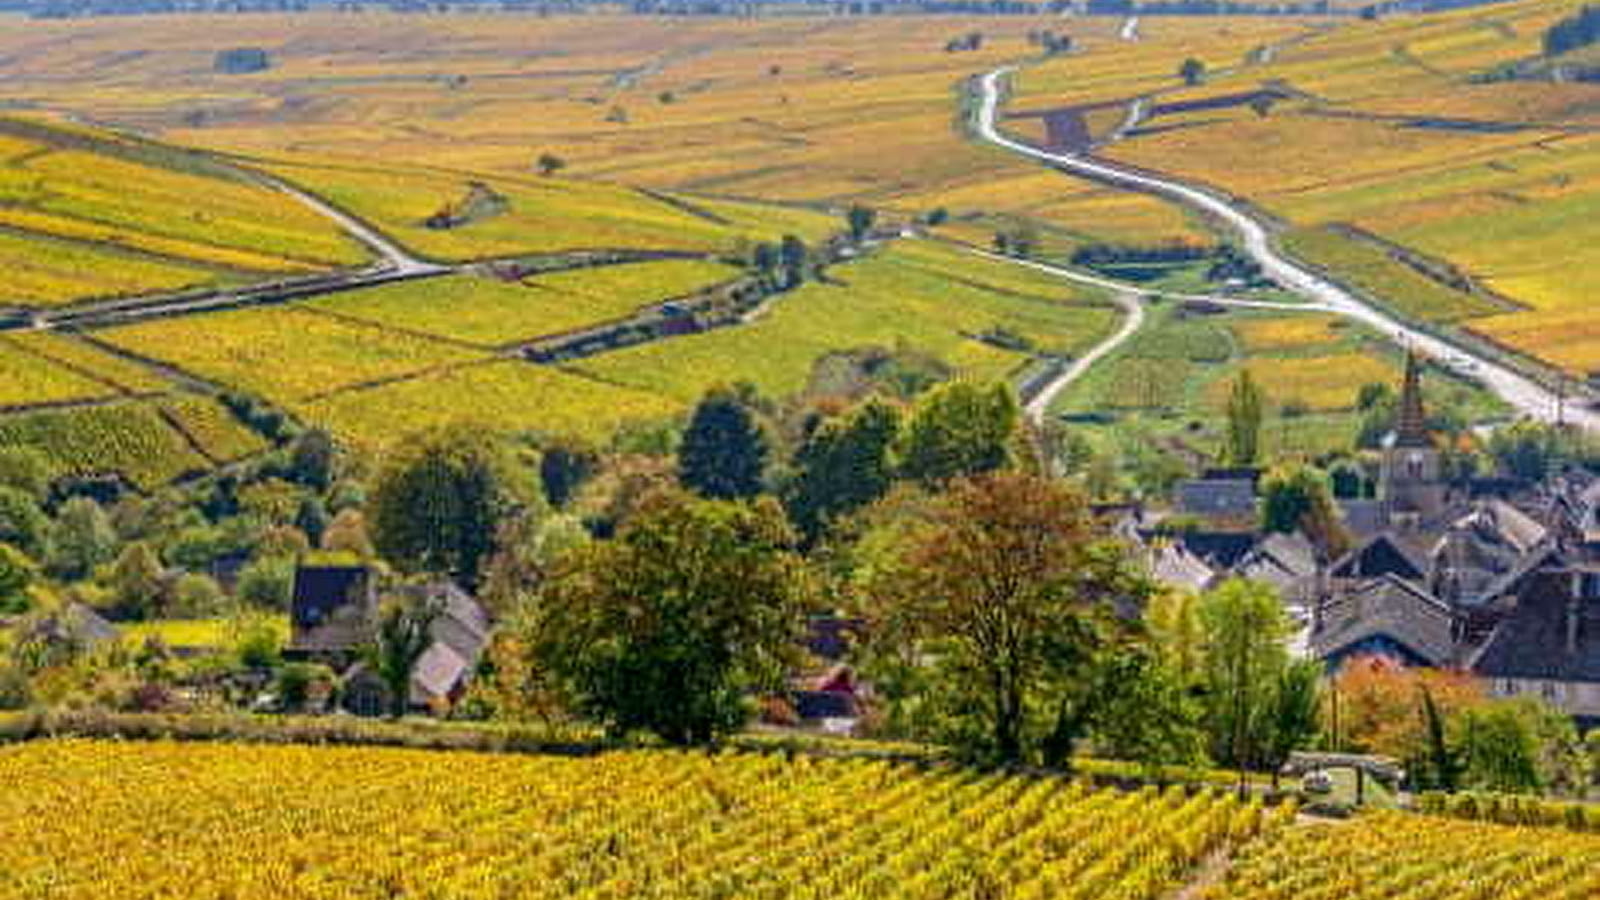 Wine and Tours - Stay in Côte de Beaune - 1 day / 1 night